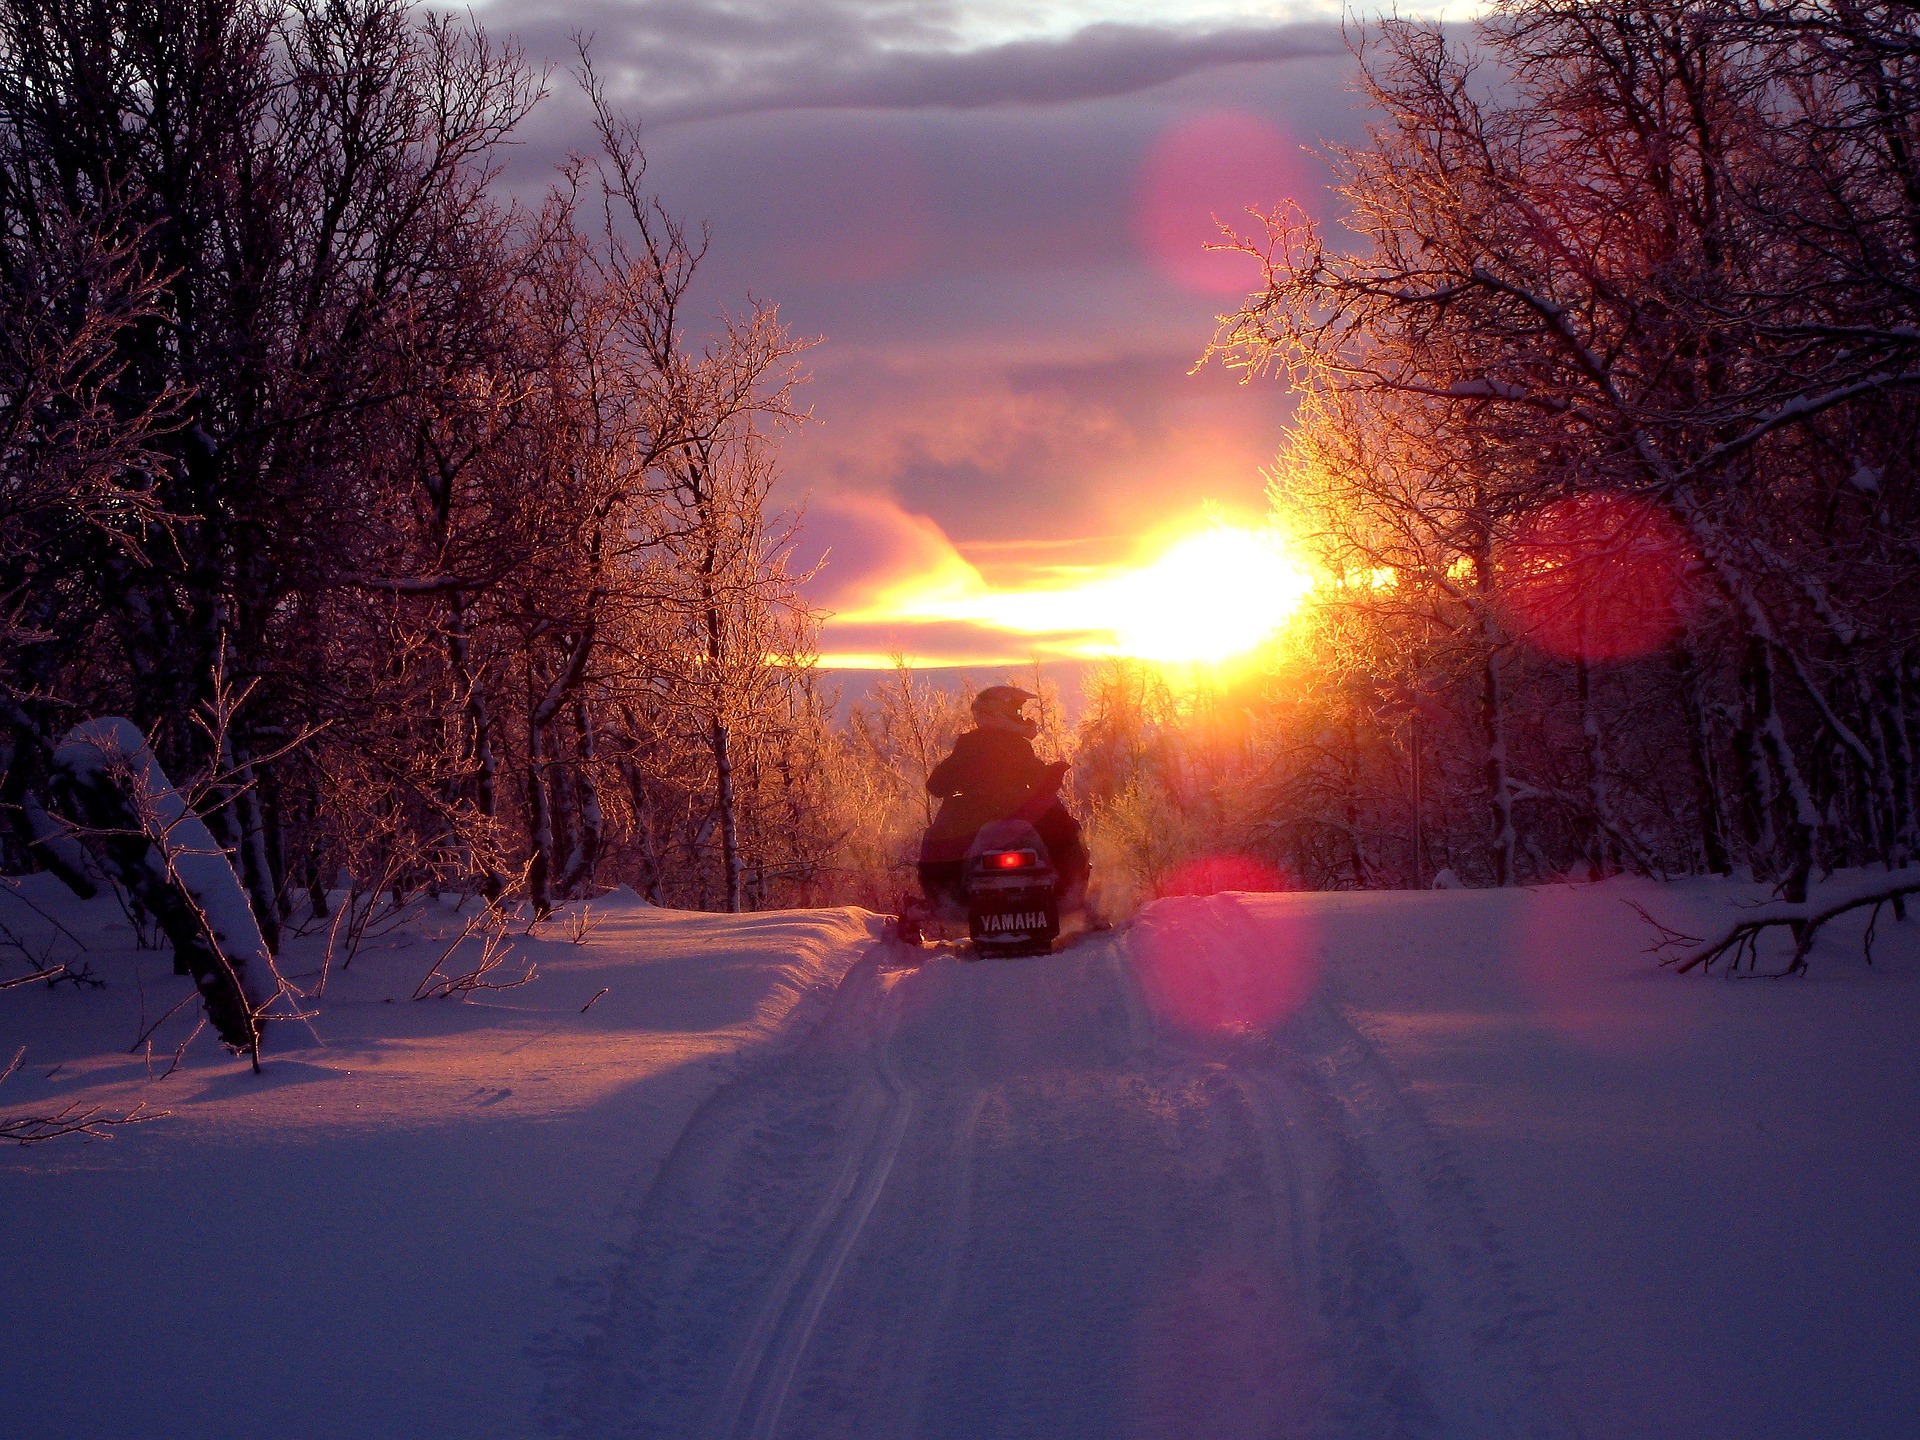 Snowmobile against the sunset.